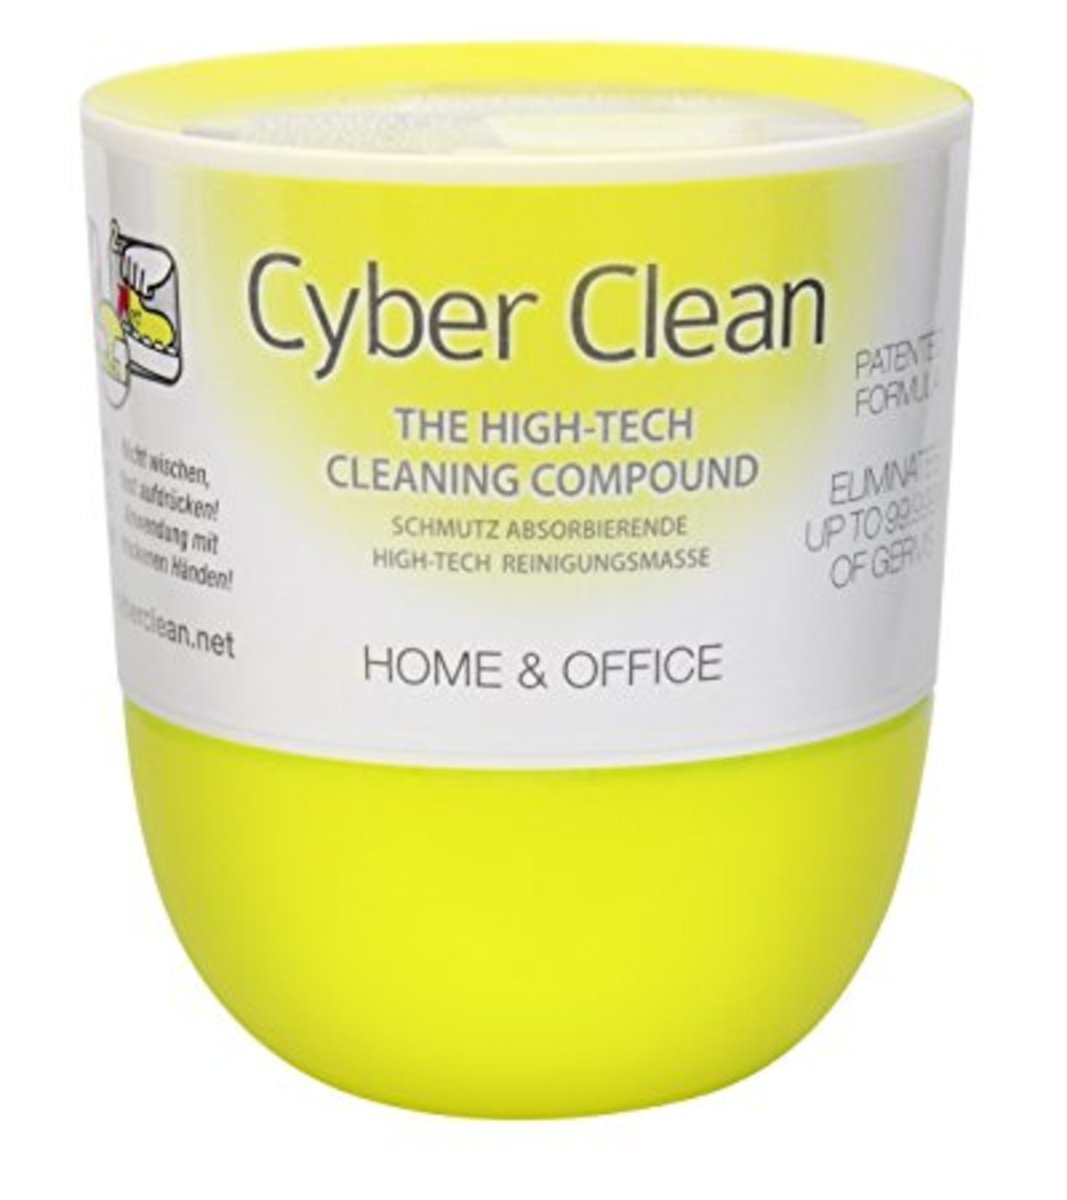 Cyber Clean JK-46280 High-tech Cleaning Compound 160g (Cup)